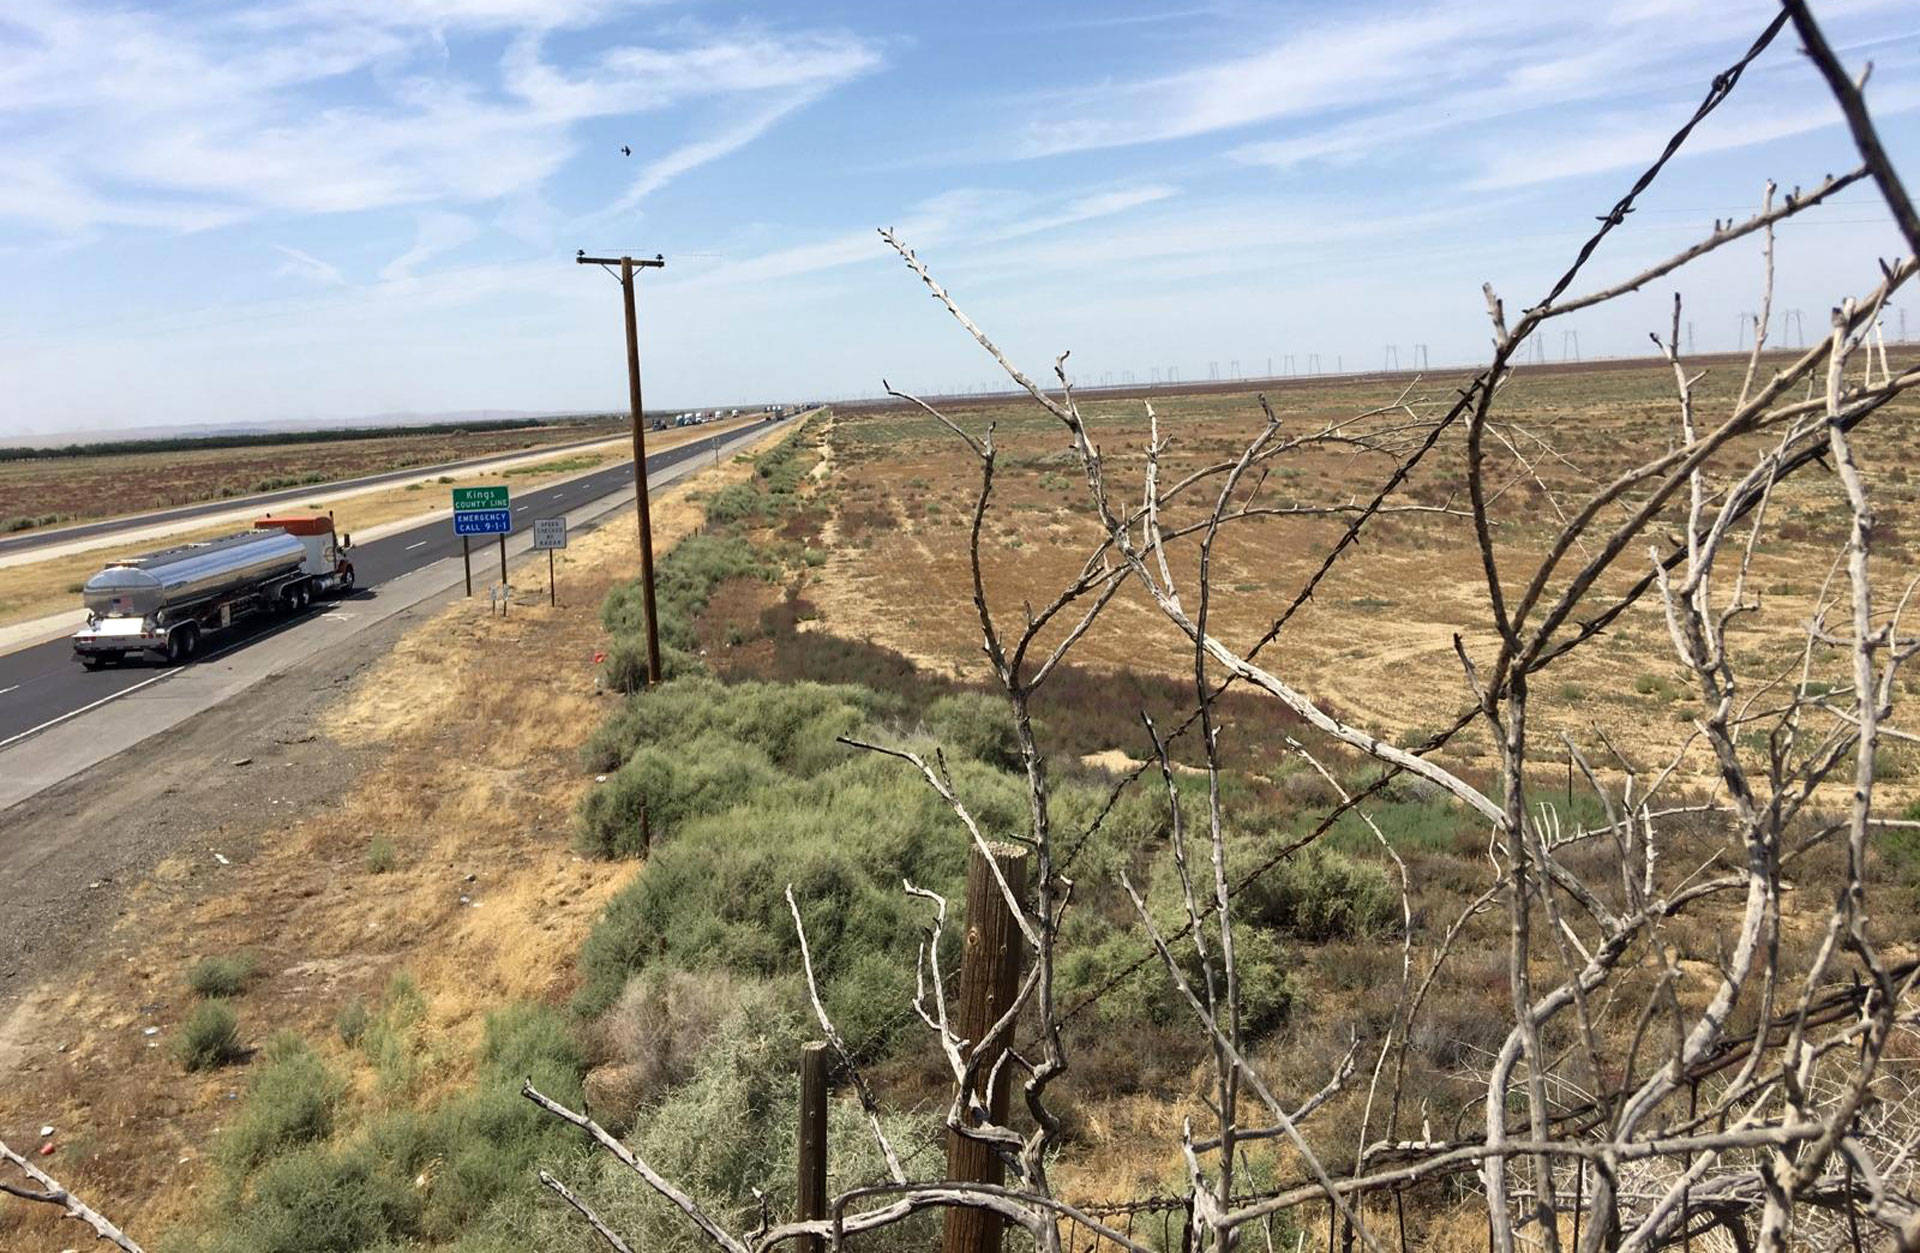 The proposed site for the Quay Valley development is right on the edge of Kern and Kings counties near Interstate 5. Ezra David Romero/KQED